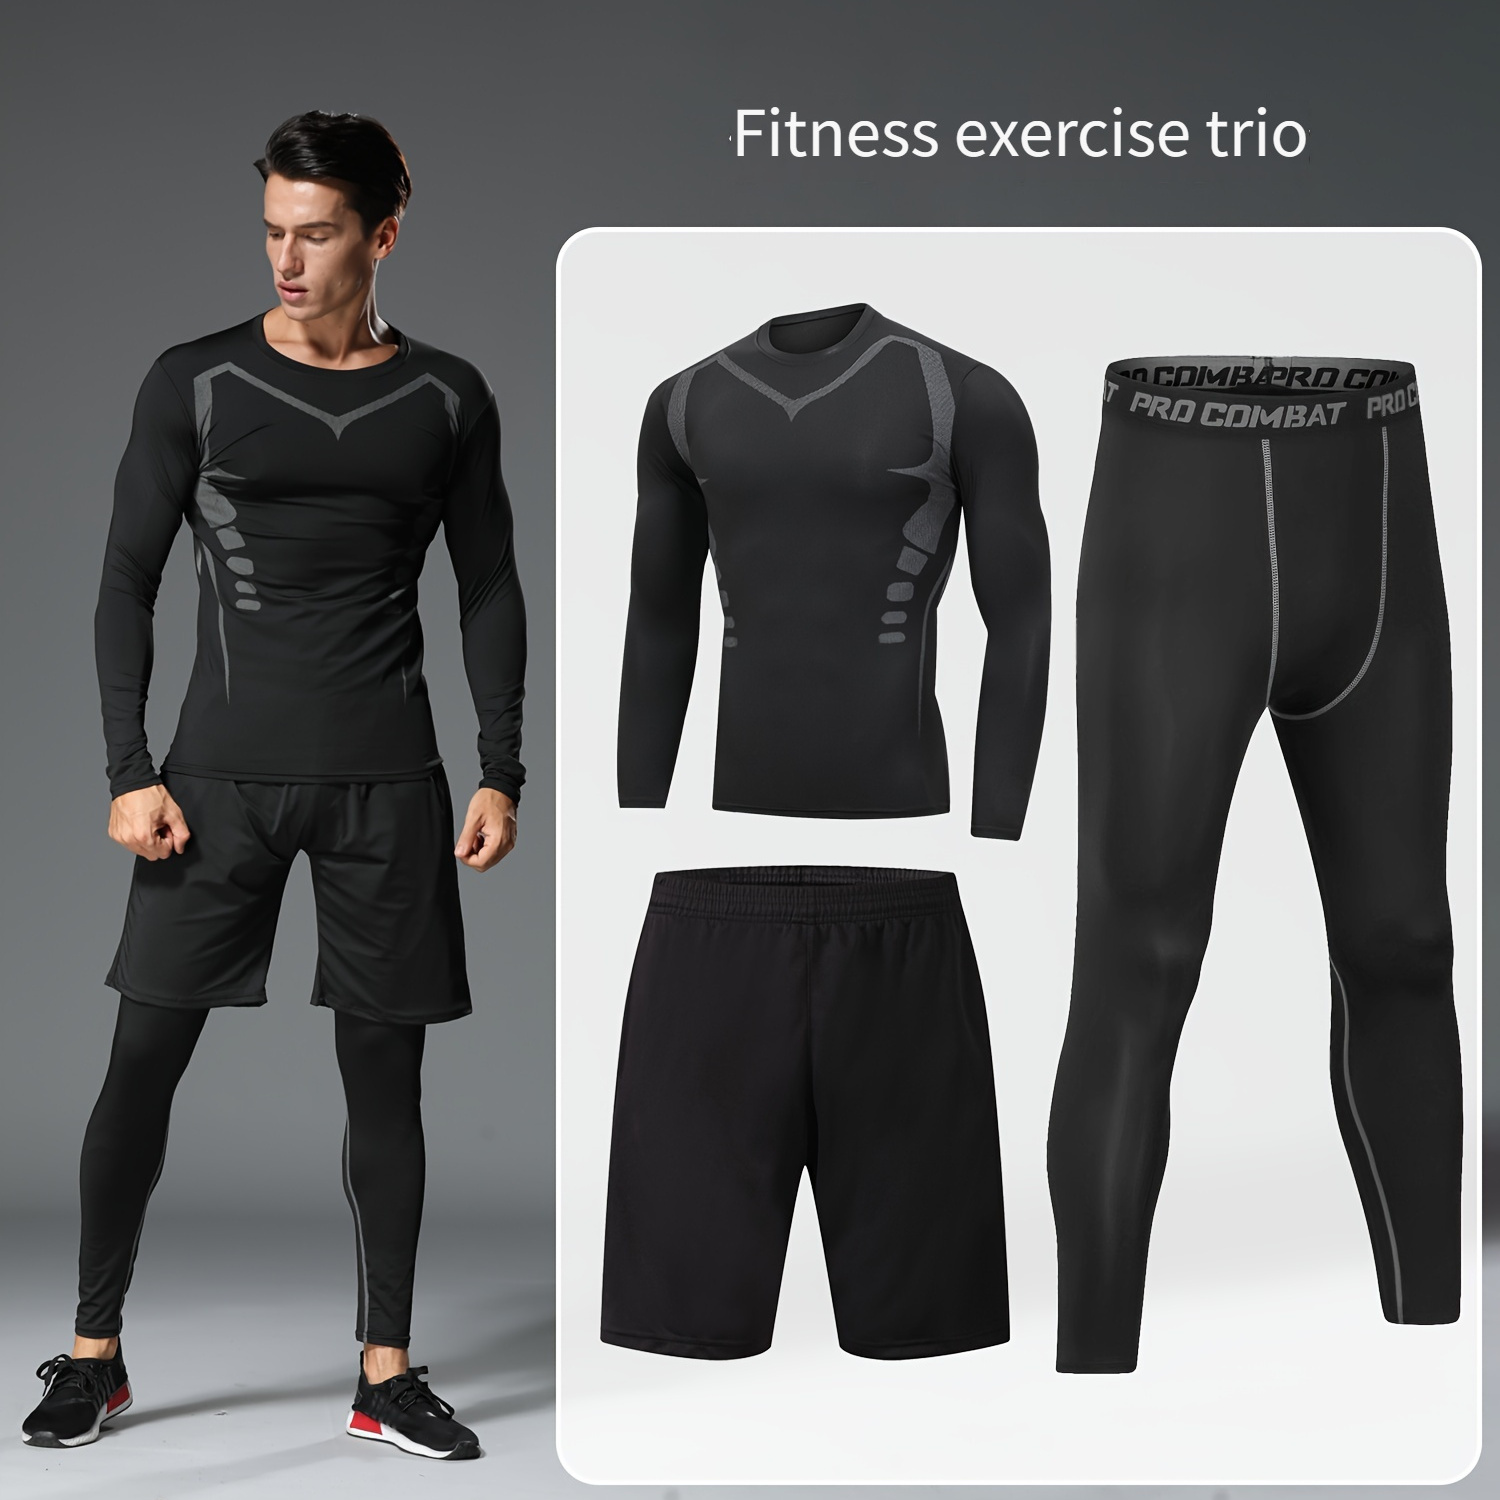 

3-piece Men's Gym Workout Sports Suits, Quick-drying Long Sleeve T-shirts +solid Comfy Shorts + Compression Leggings